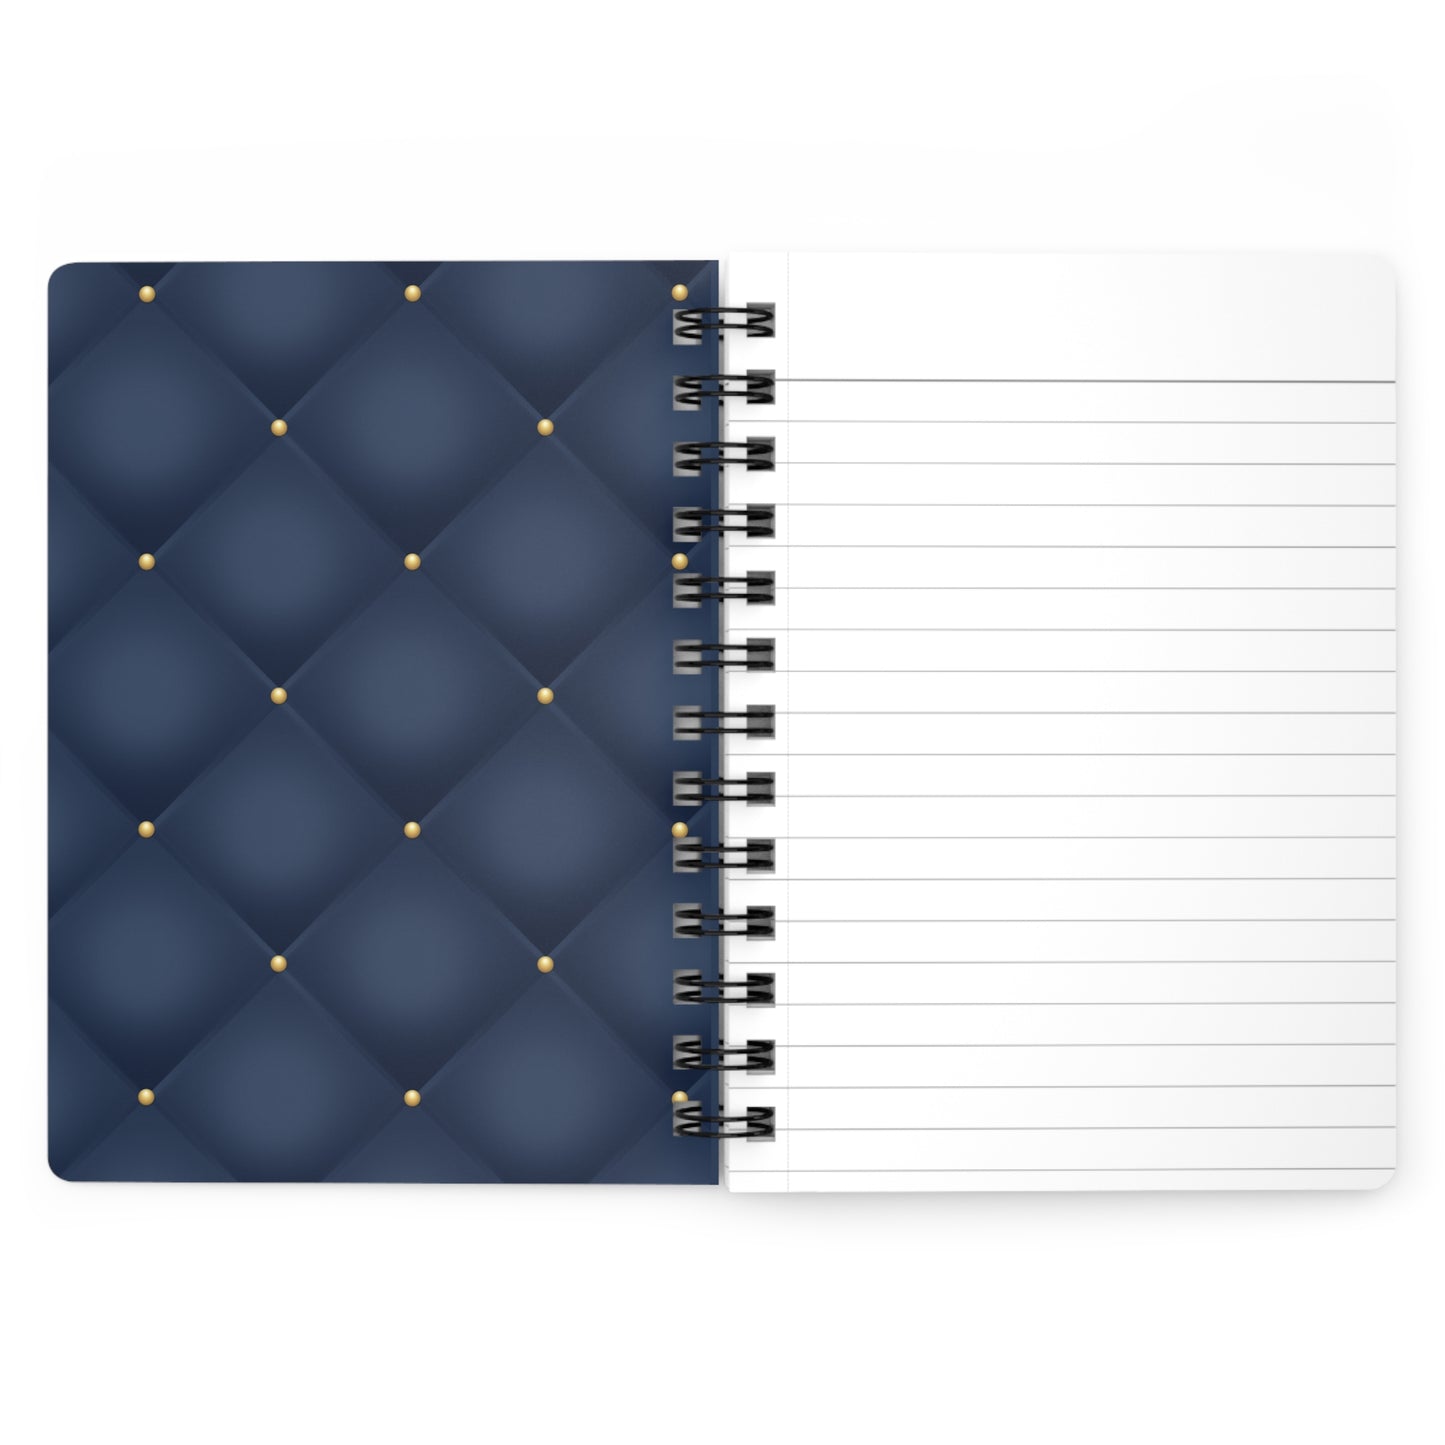 Stop for one minute Tufted Print Blue and Gold Spiral Bound Journal